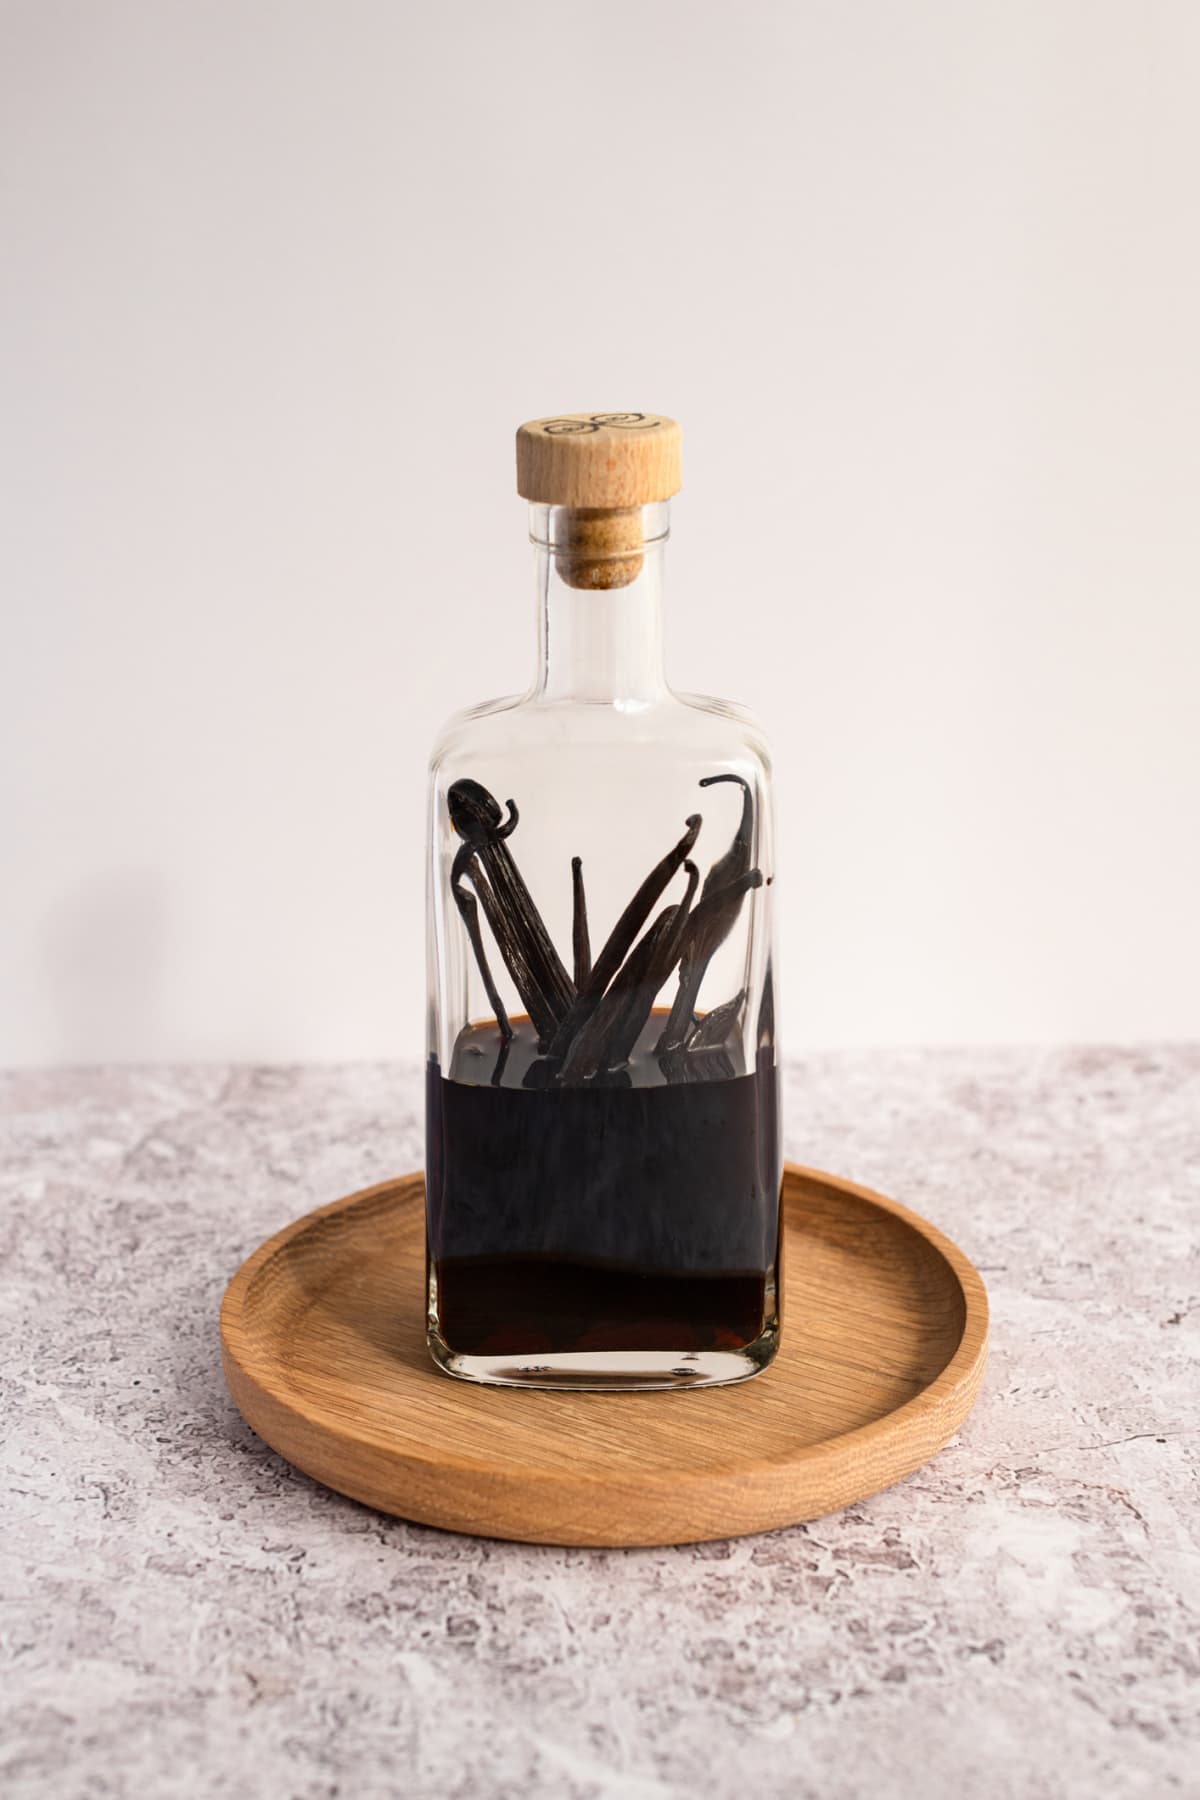 A closeup of homemade organic vanilla extract in a bottle